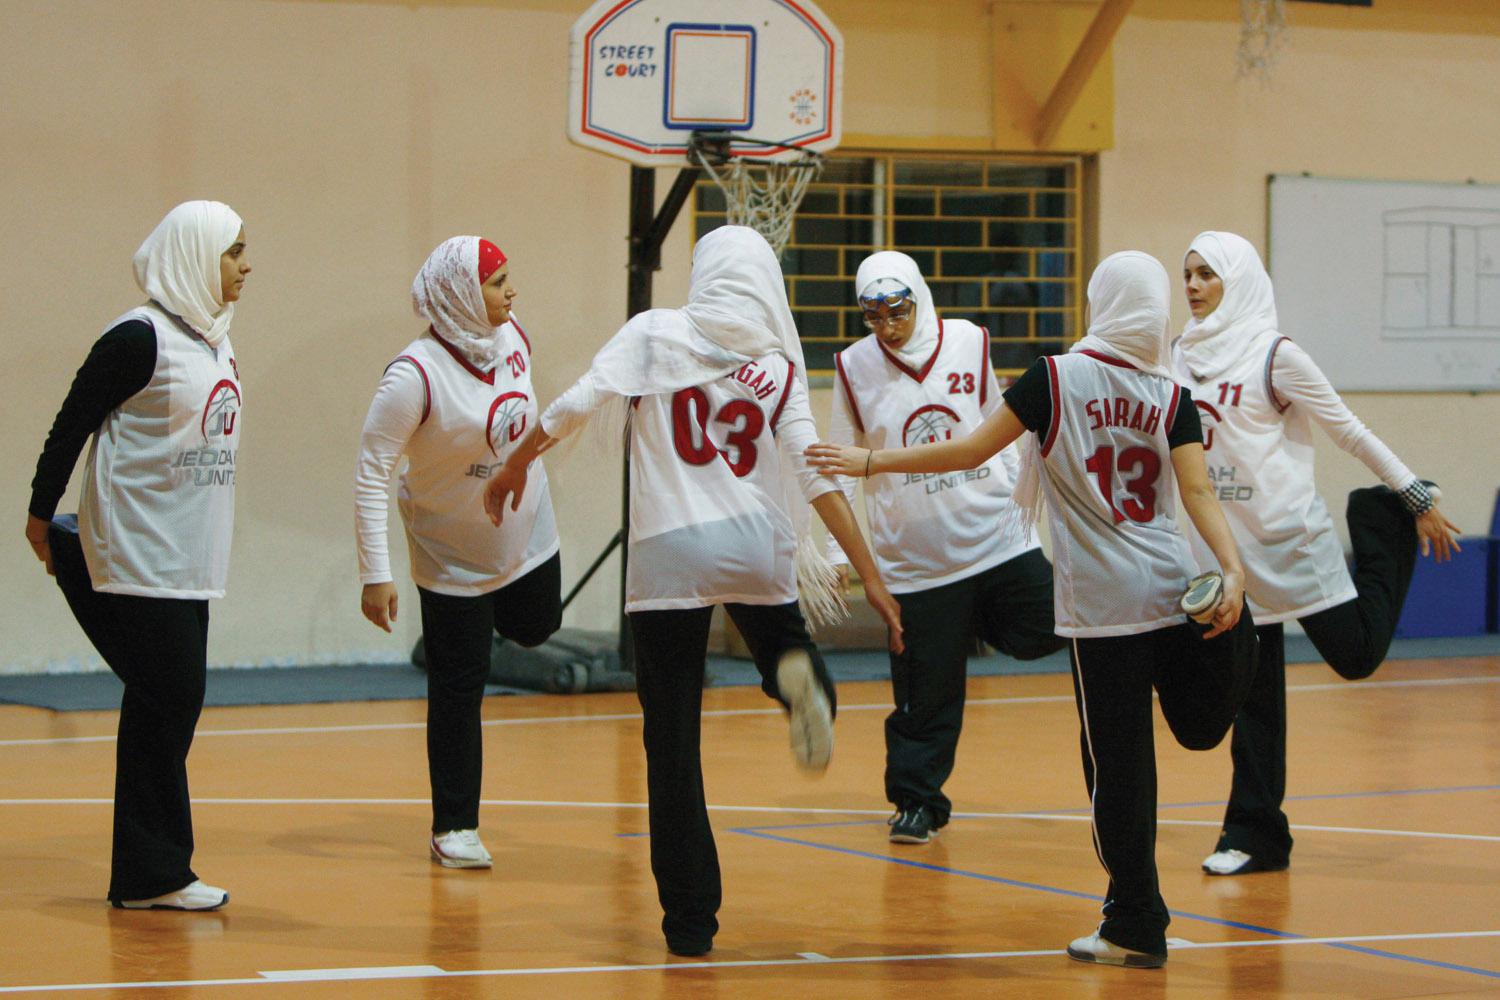 The female basketball team of Jeddah United warm up in Jordan on April 21, 2009. Jeddah United is the only private sports company with women’s teams.